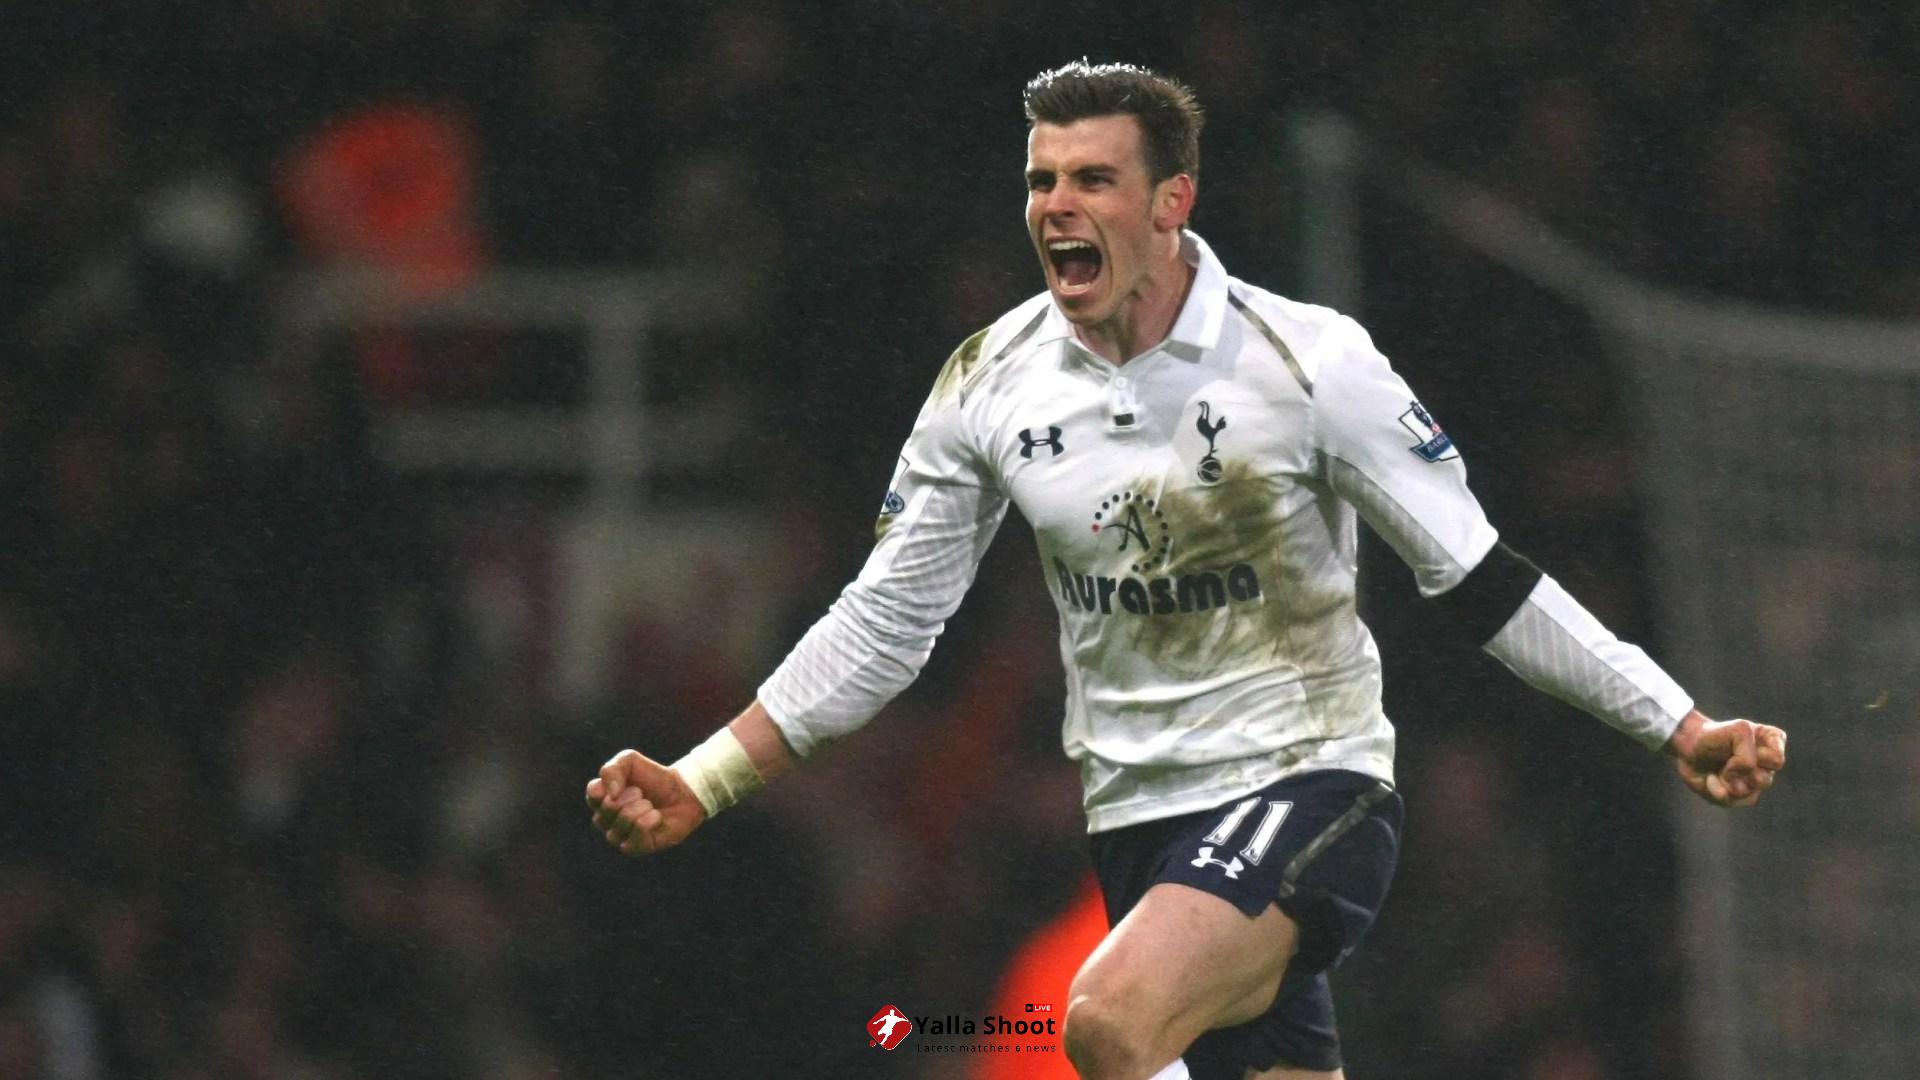 I played with Gareth Bale at Tottenham and couldn't believe his pre-match meal... I tried it once and it did not go well